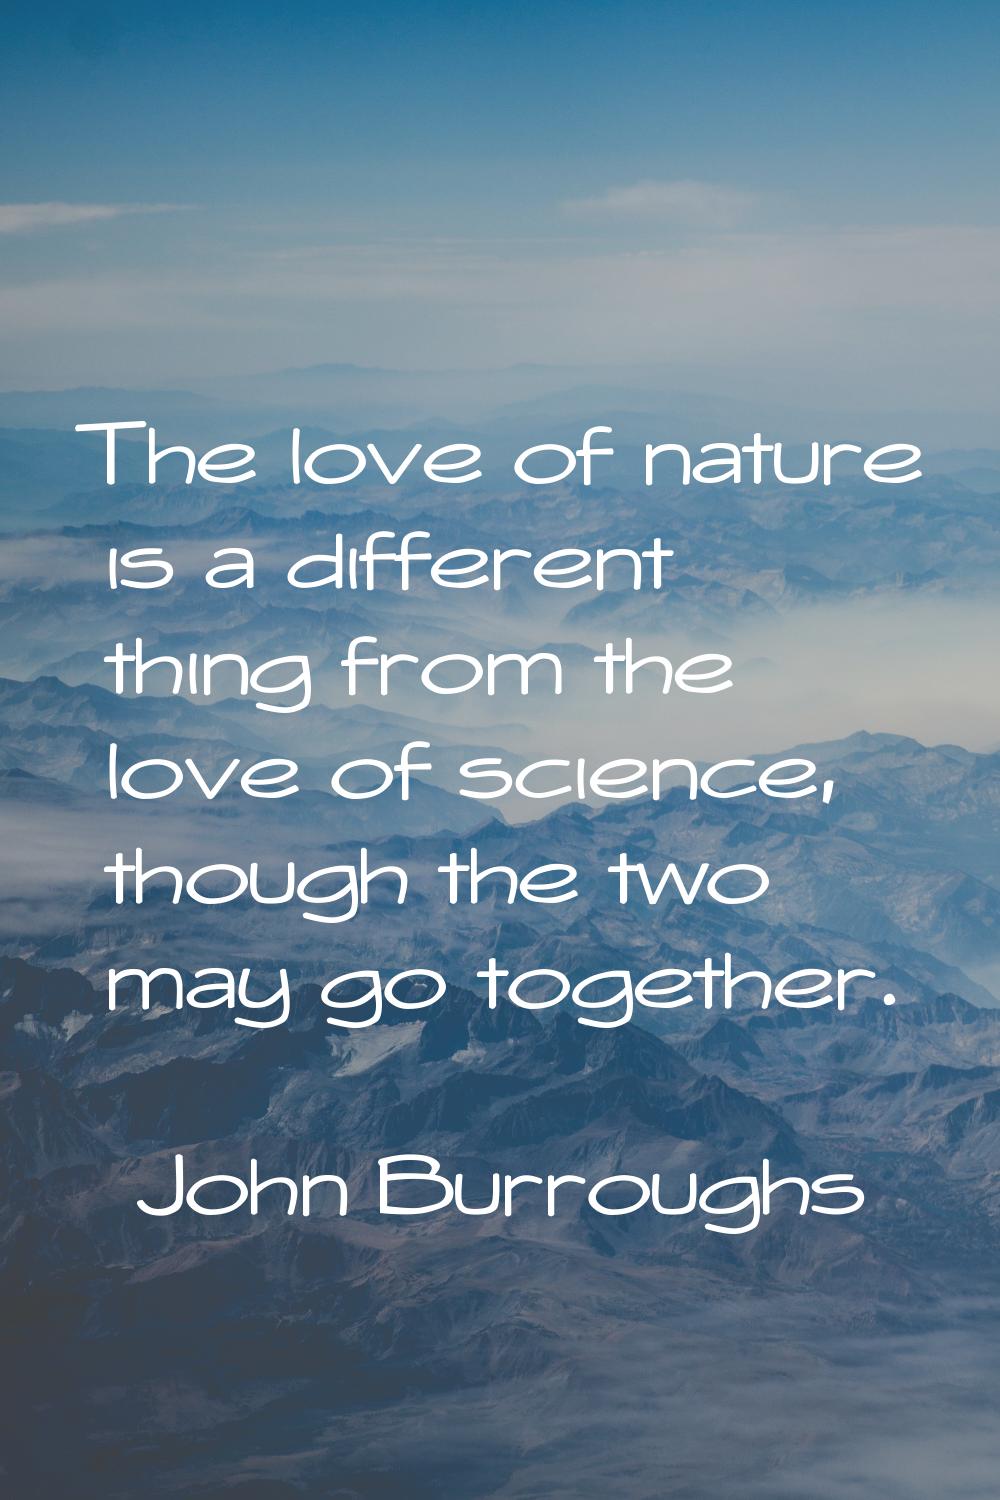 The love of nature is a different thing from the love of science, though the two may go together.